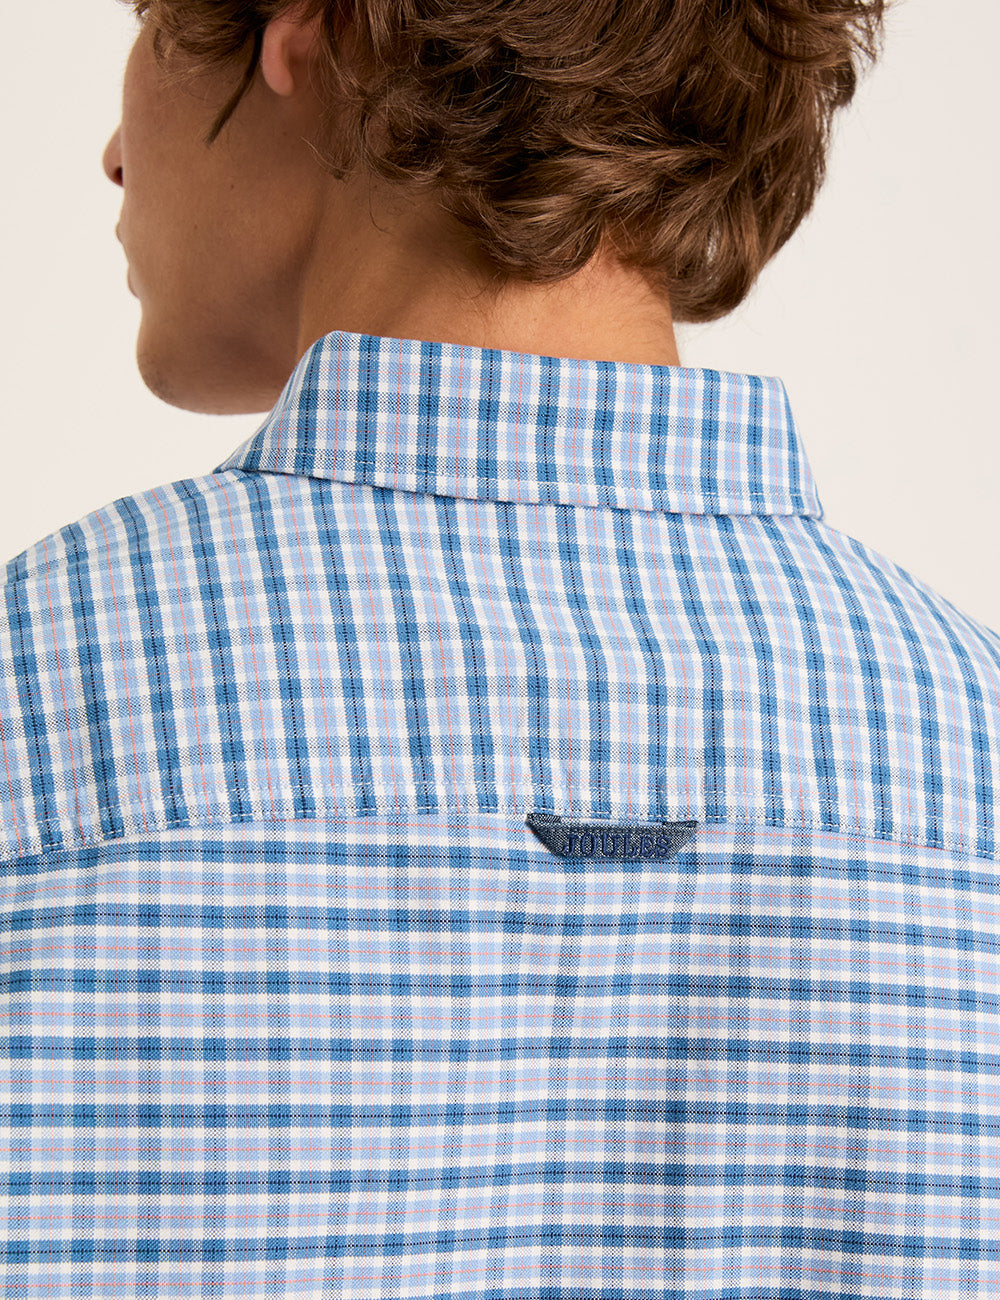 Joules Welford Shirt - Blue Check